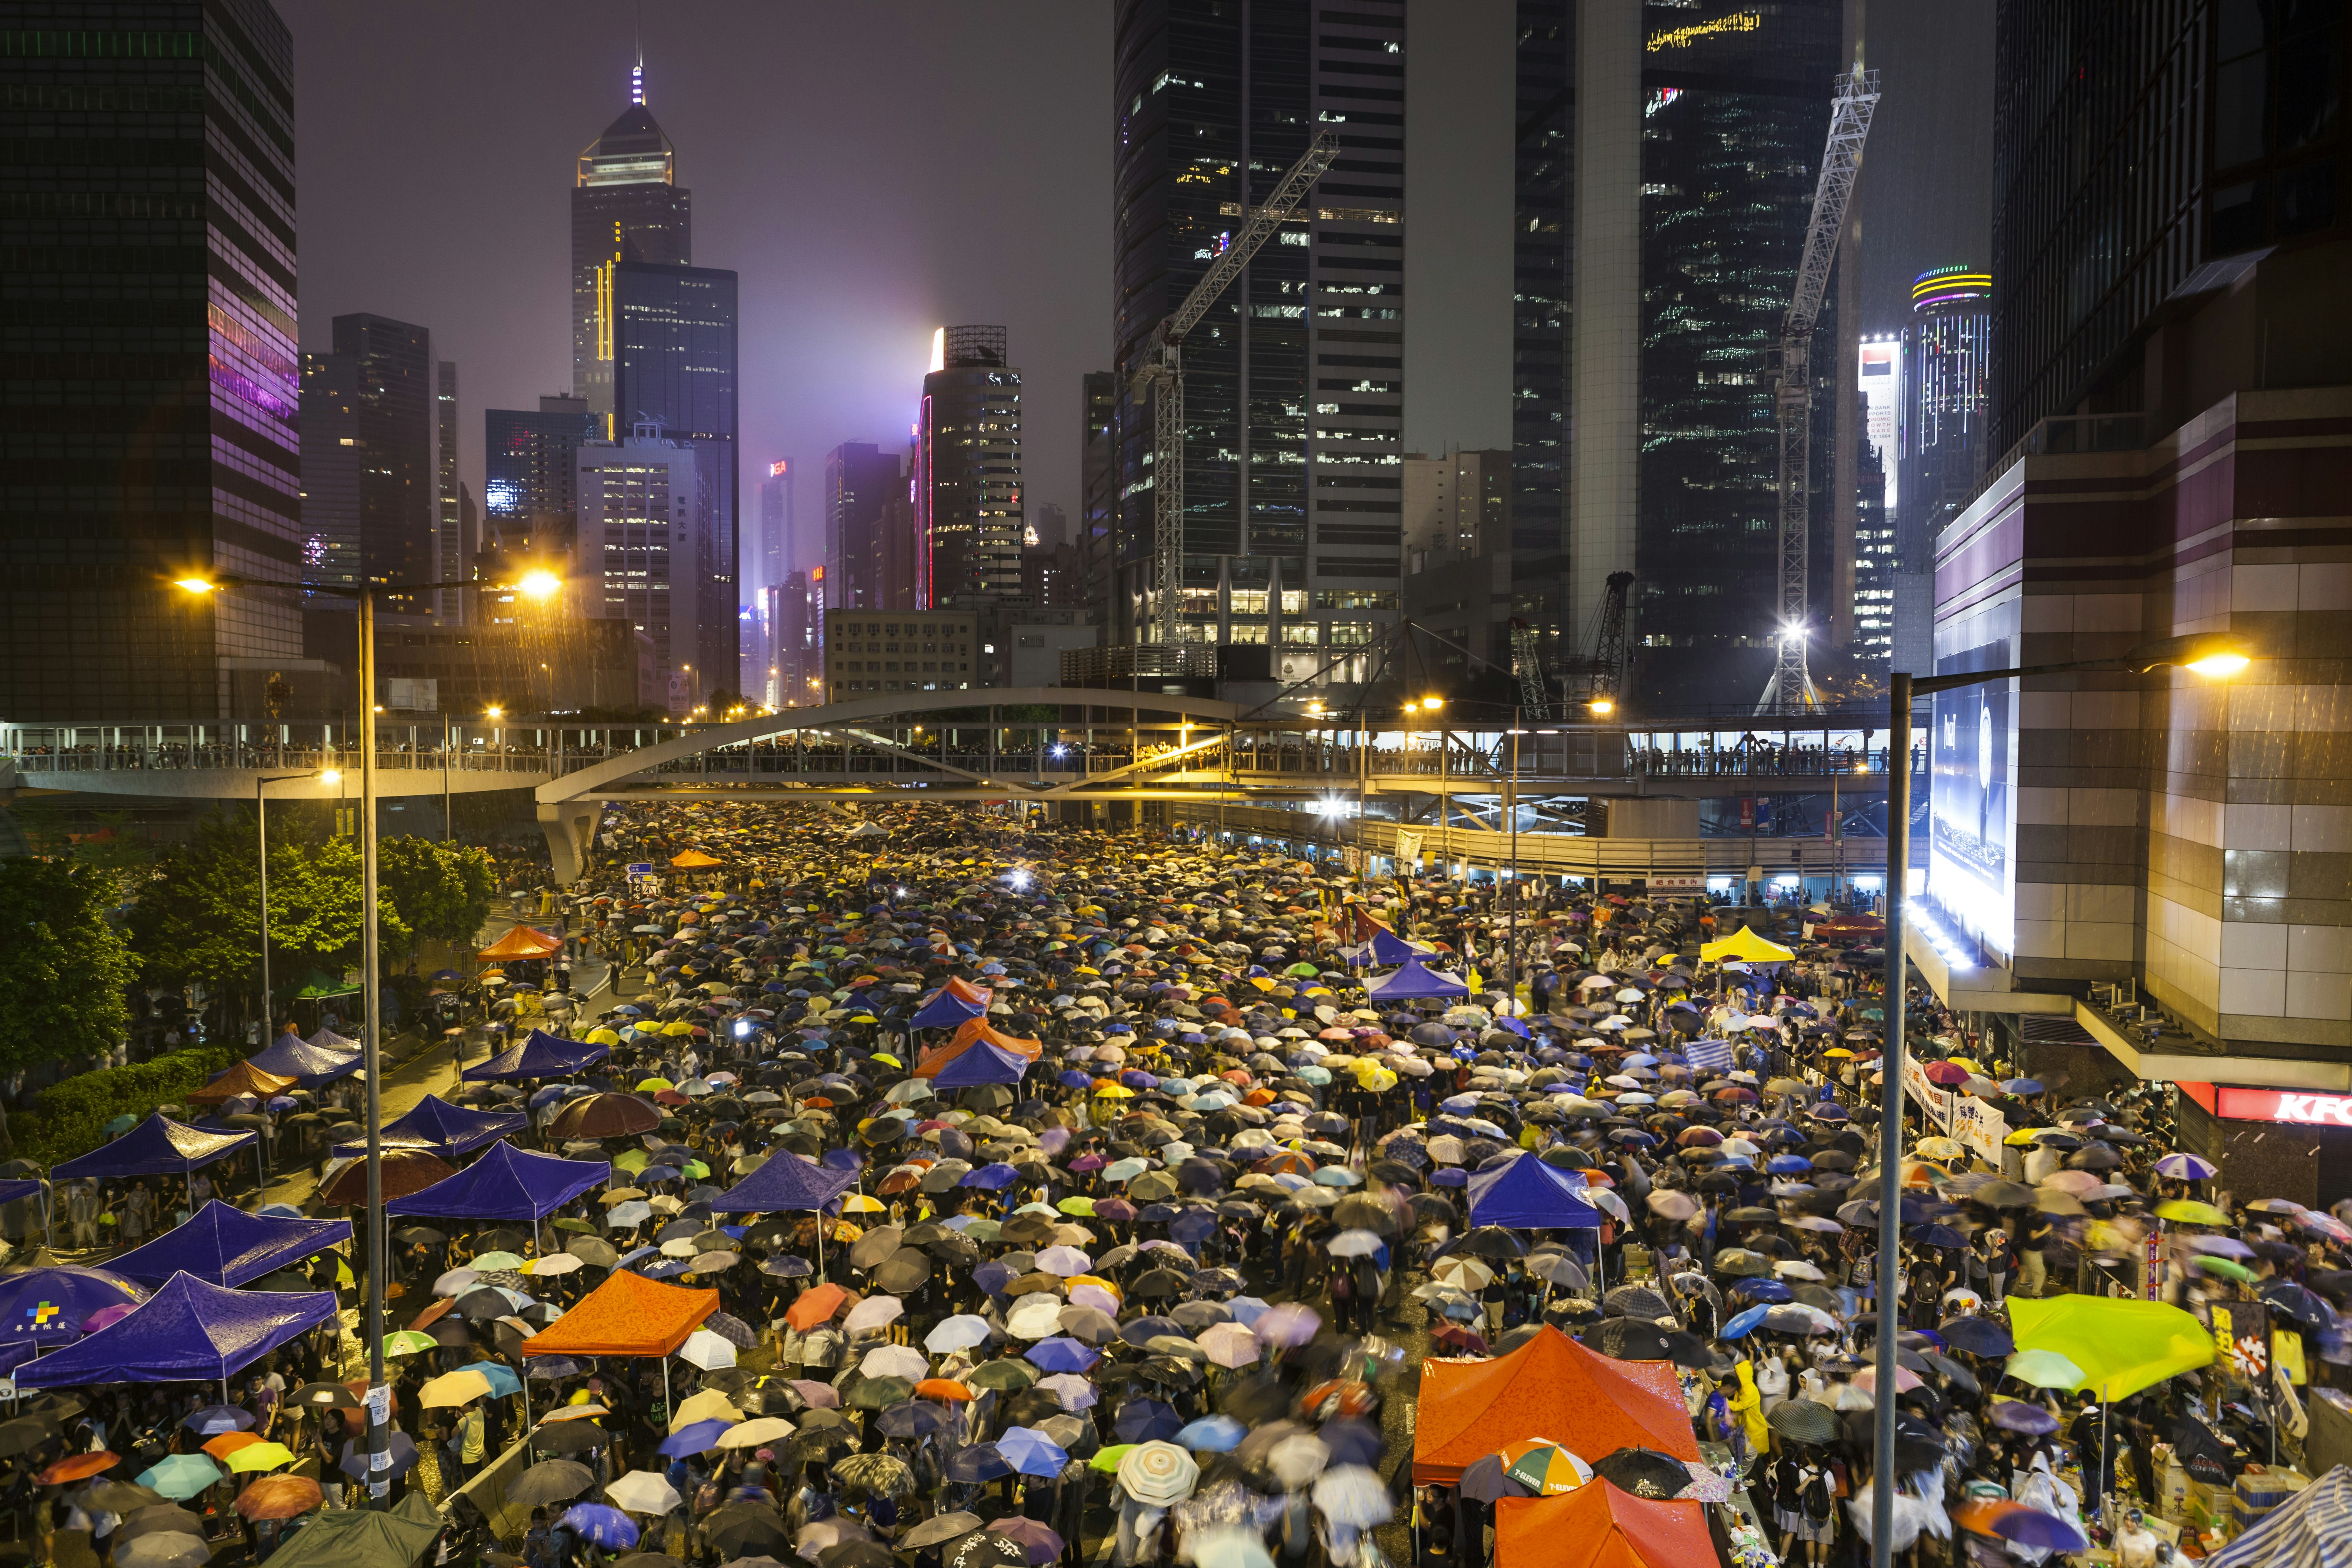 Protestors with umbrellas gather on a street between high buildings at night